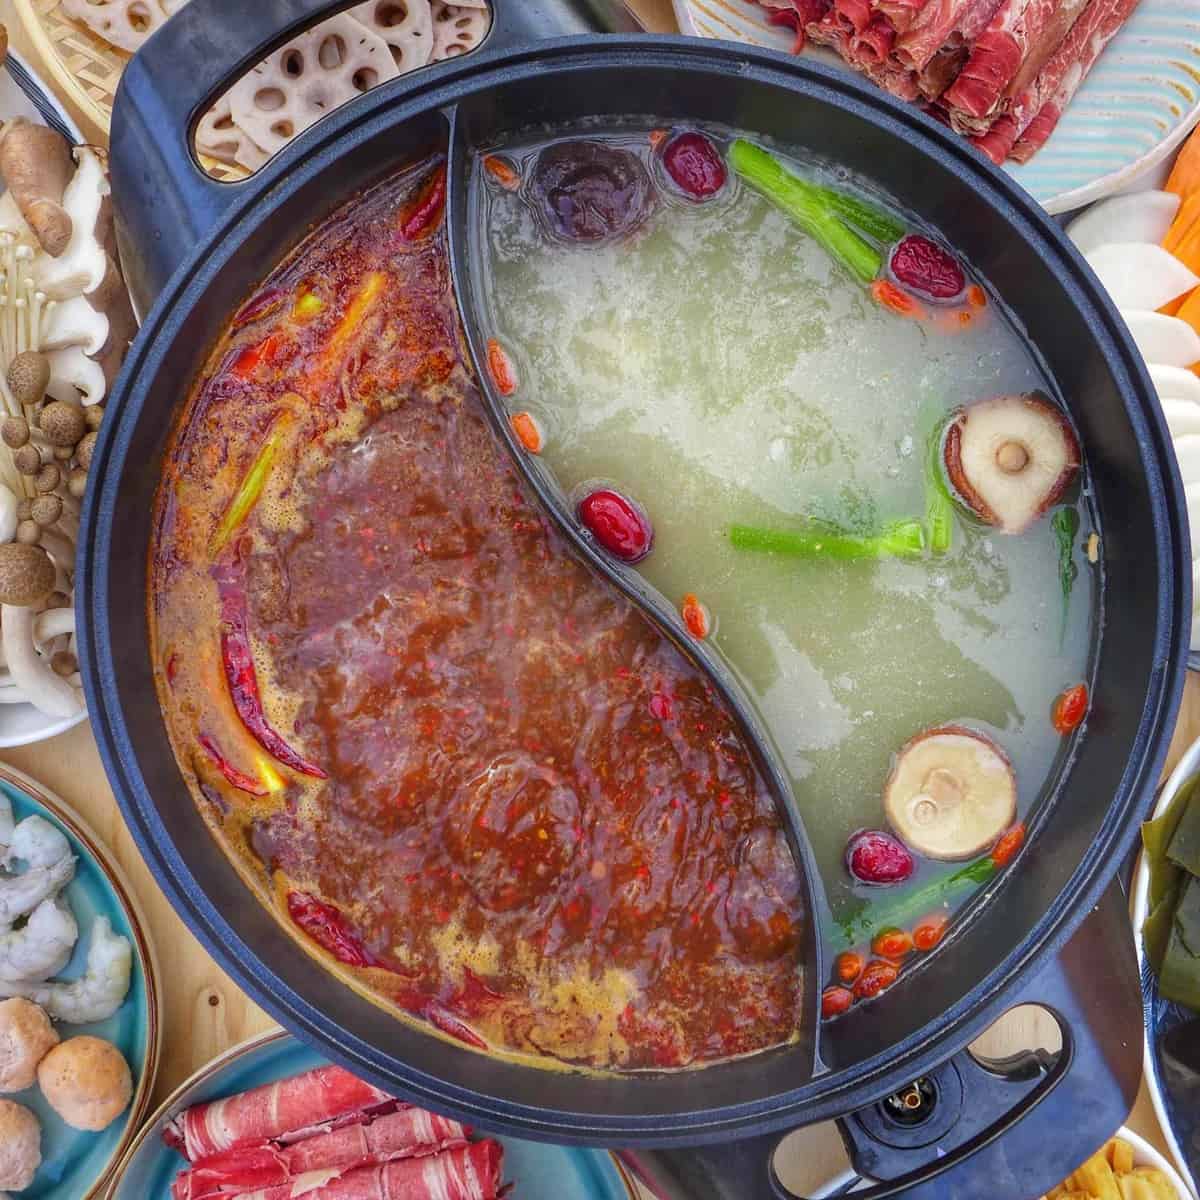 Hot Pot in Fridge: To Chill or Not to Chill?